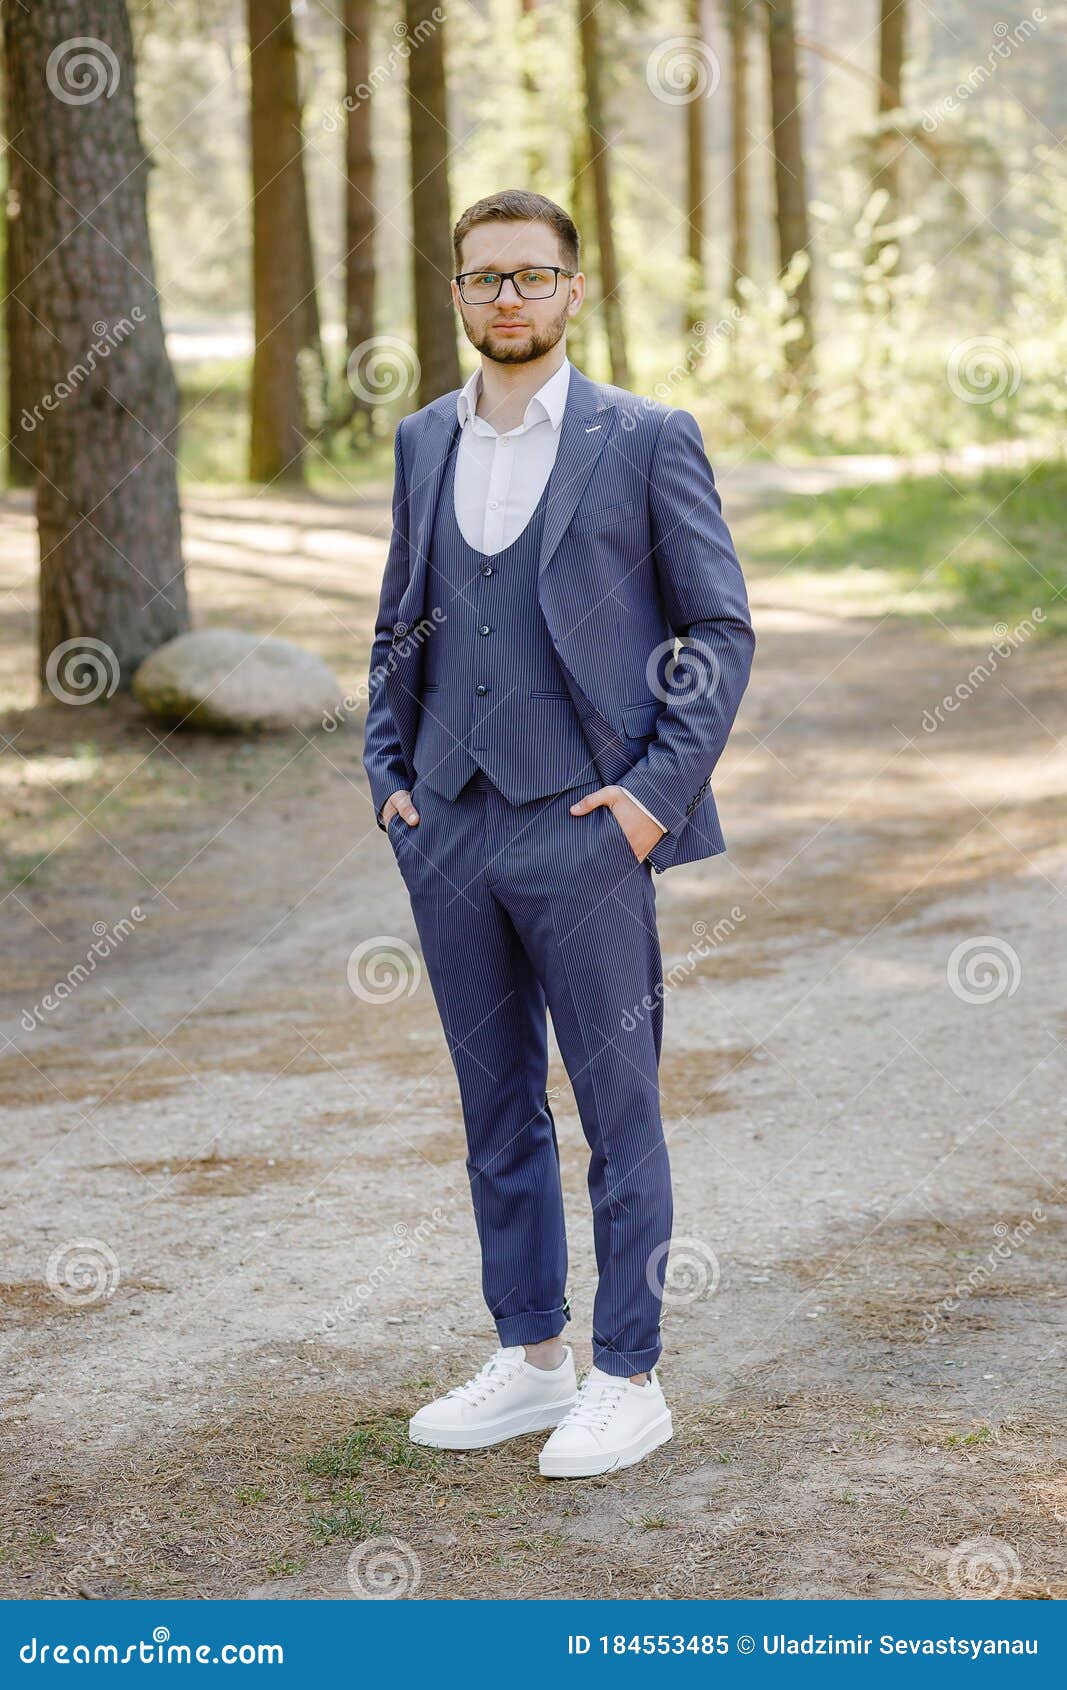 man blue suit white sneakers posing forest young man blue suit white sneakers posing forest 184553485